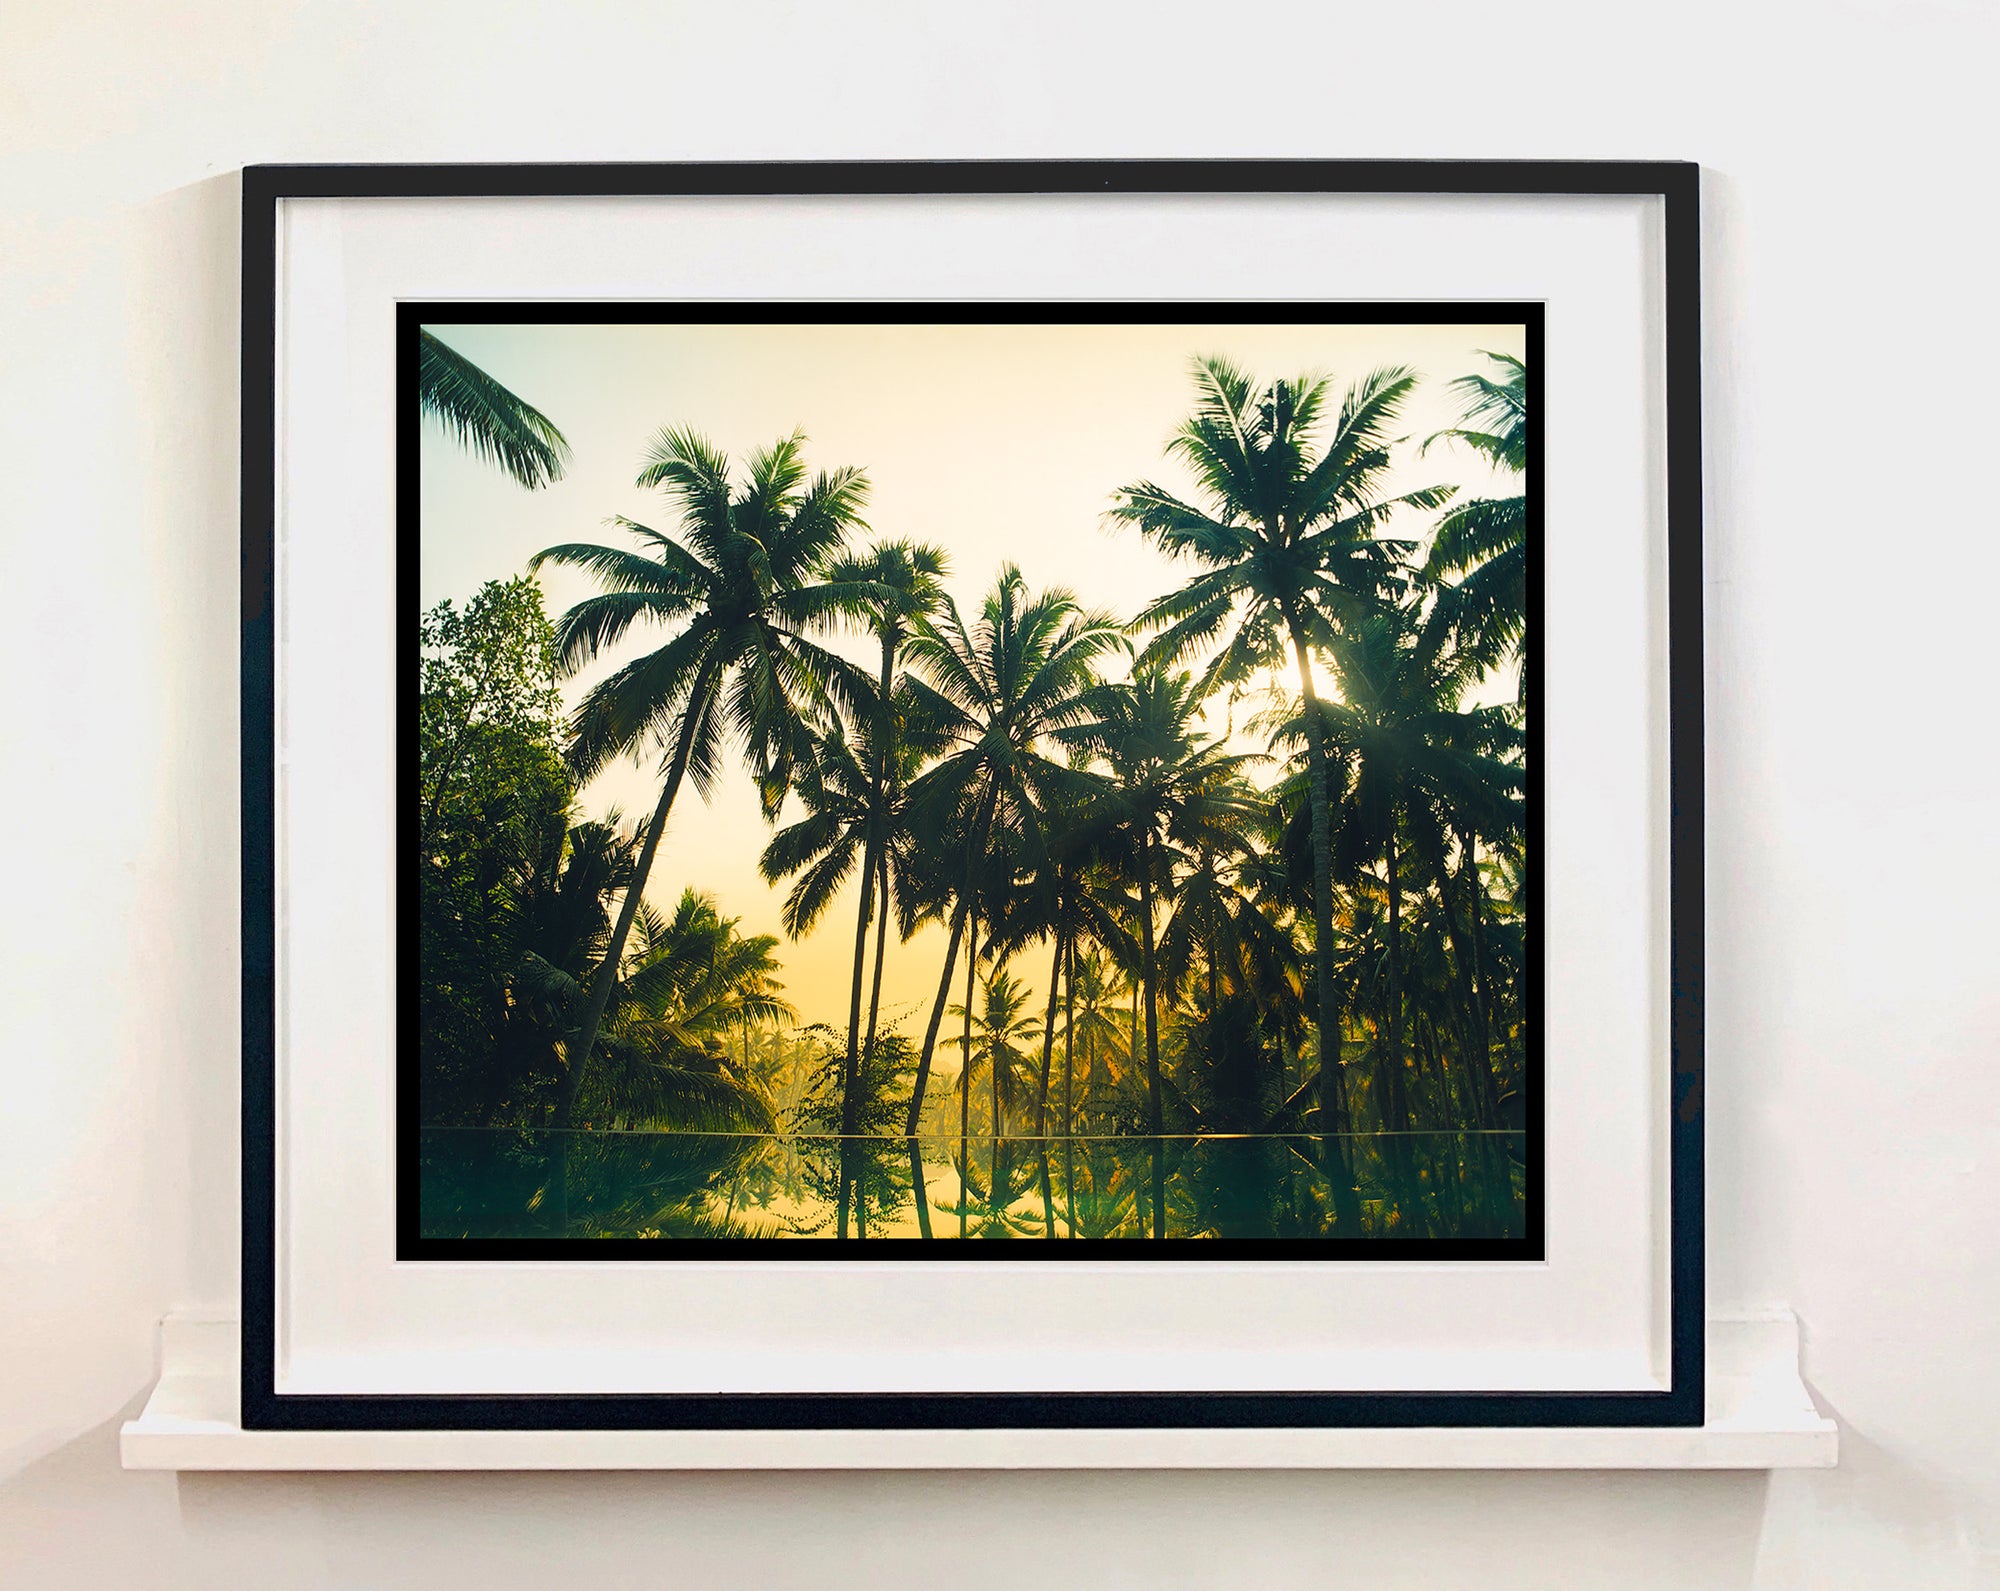 Palm trees stand strong against a setting sun, reflecting gracefully in the water below in this artowork 'Vetyver Pool', taken in Poovar, Kerala in 2013. This gorgeous palm tree print has warming tones and will take you somewhere tropical. Richard Heeps is inspired by films, often referencing them in day to day life and on this journey he had 'Apocalypse Now' on his mind.